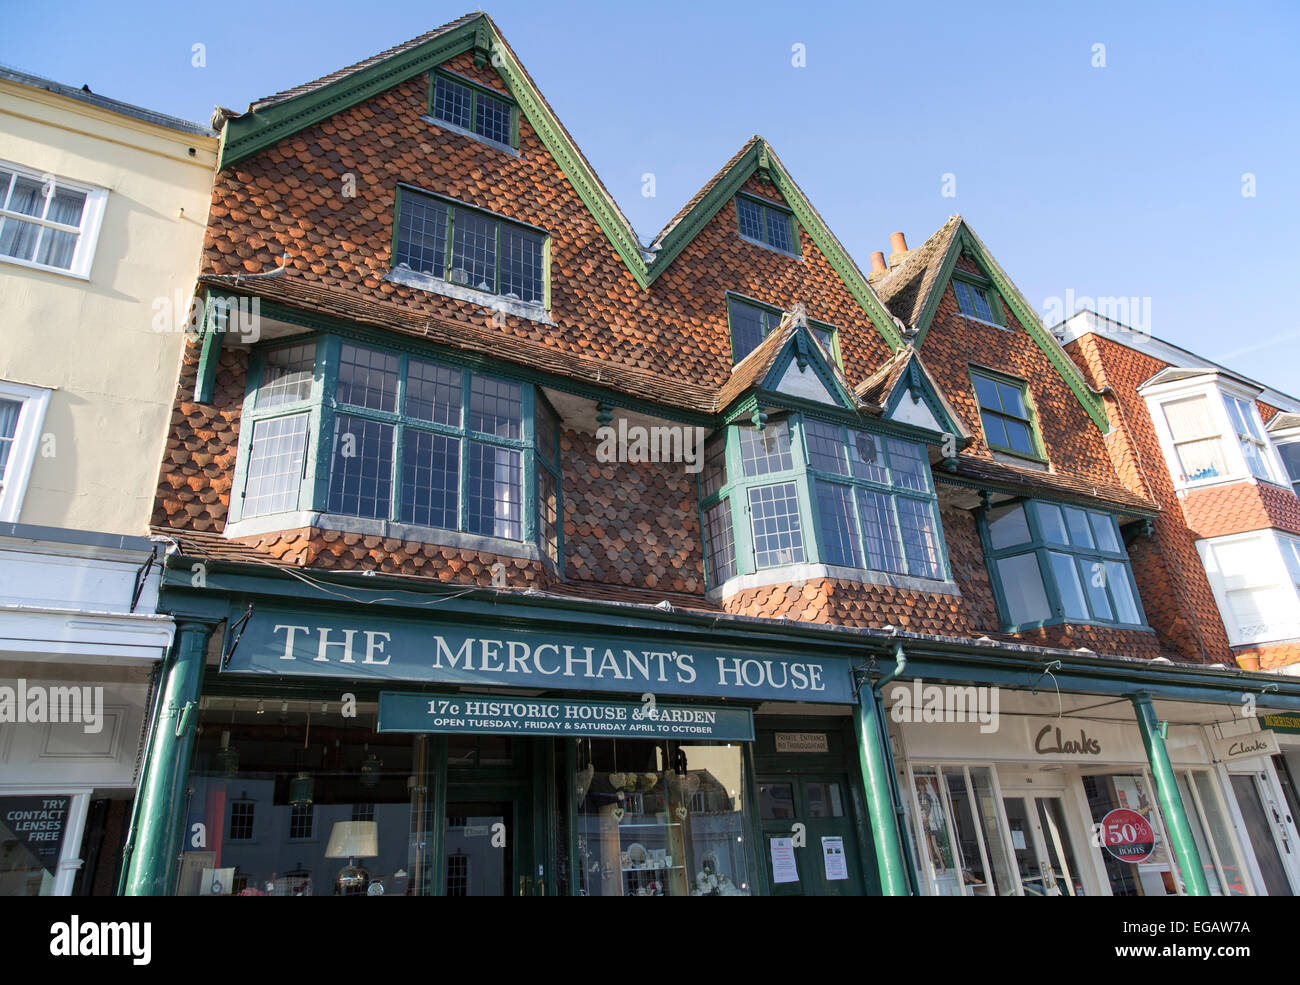 The Merchant's House on the High Street in Marlborough, Wiltshire, England, UK Stock Photo